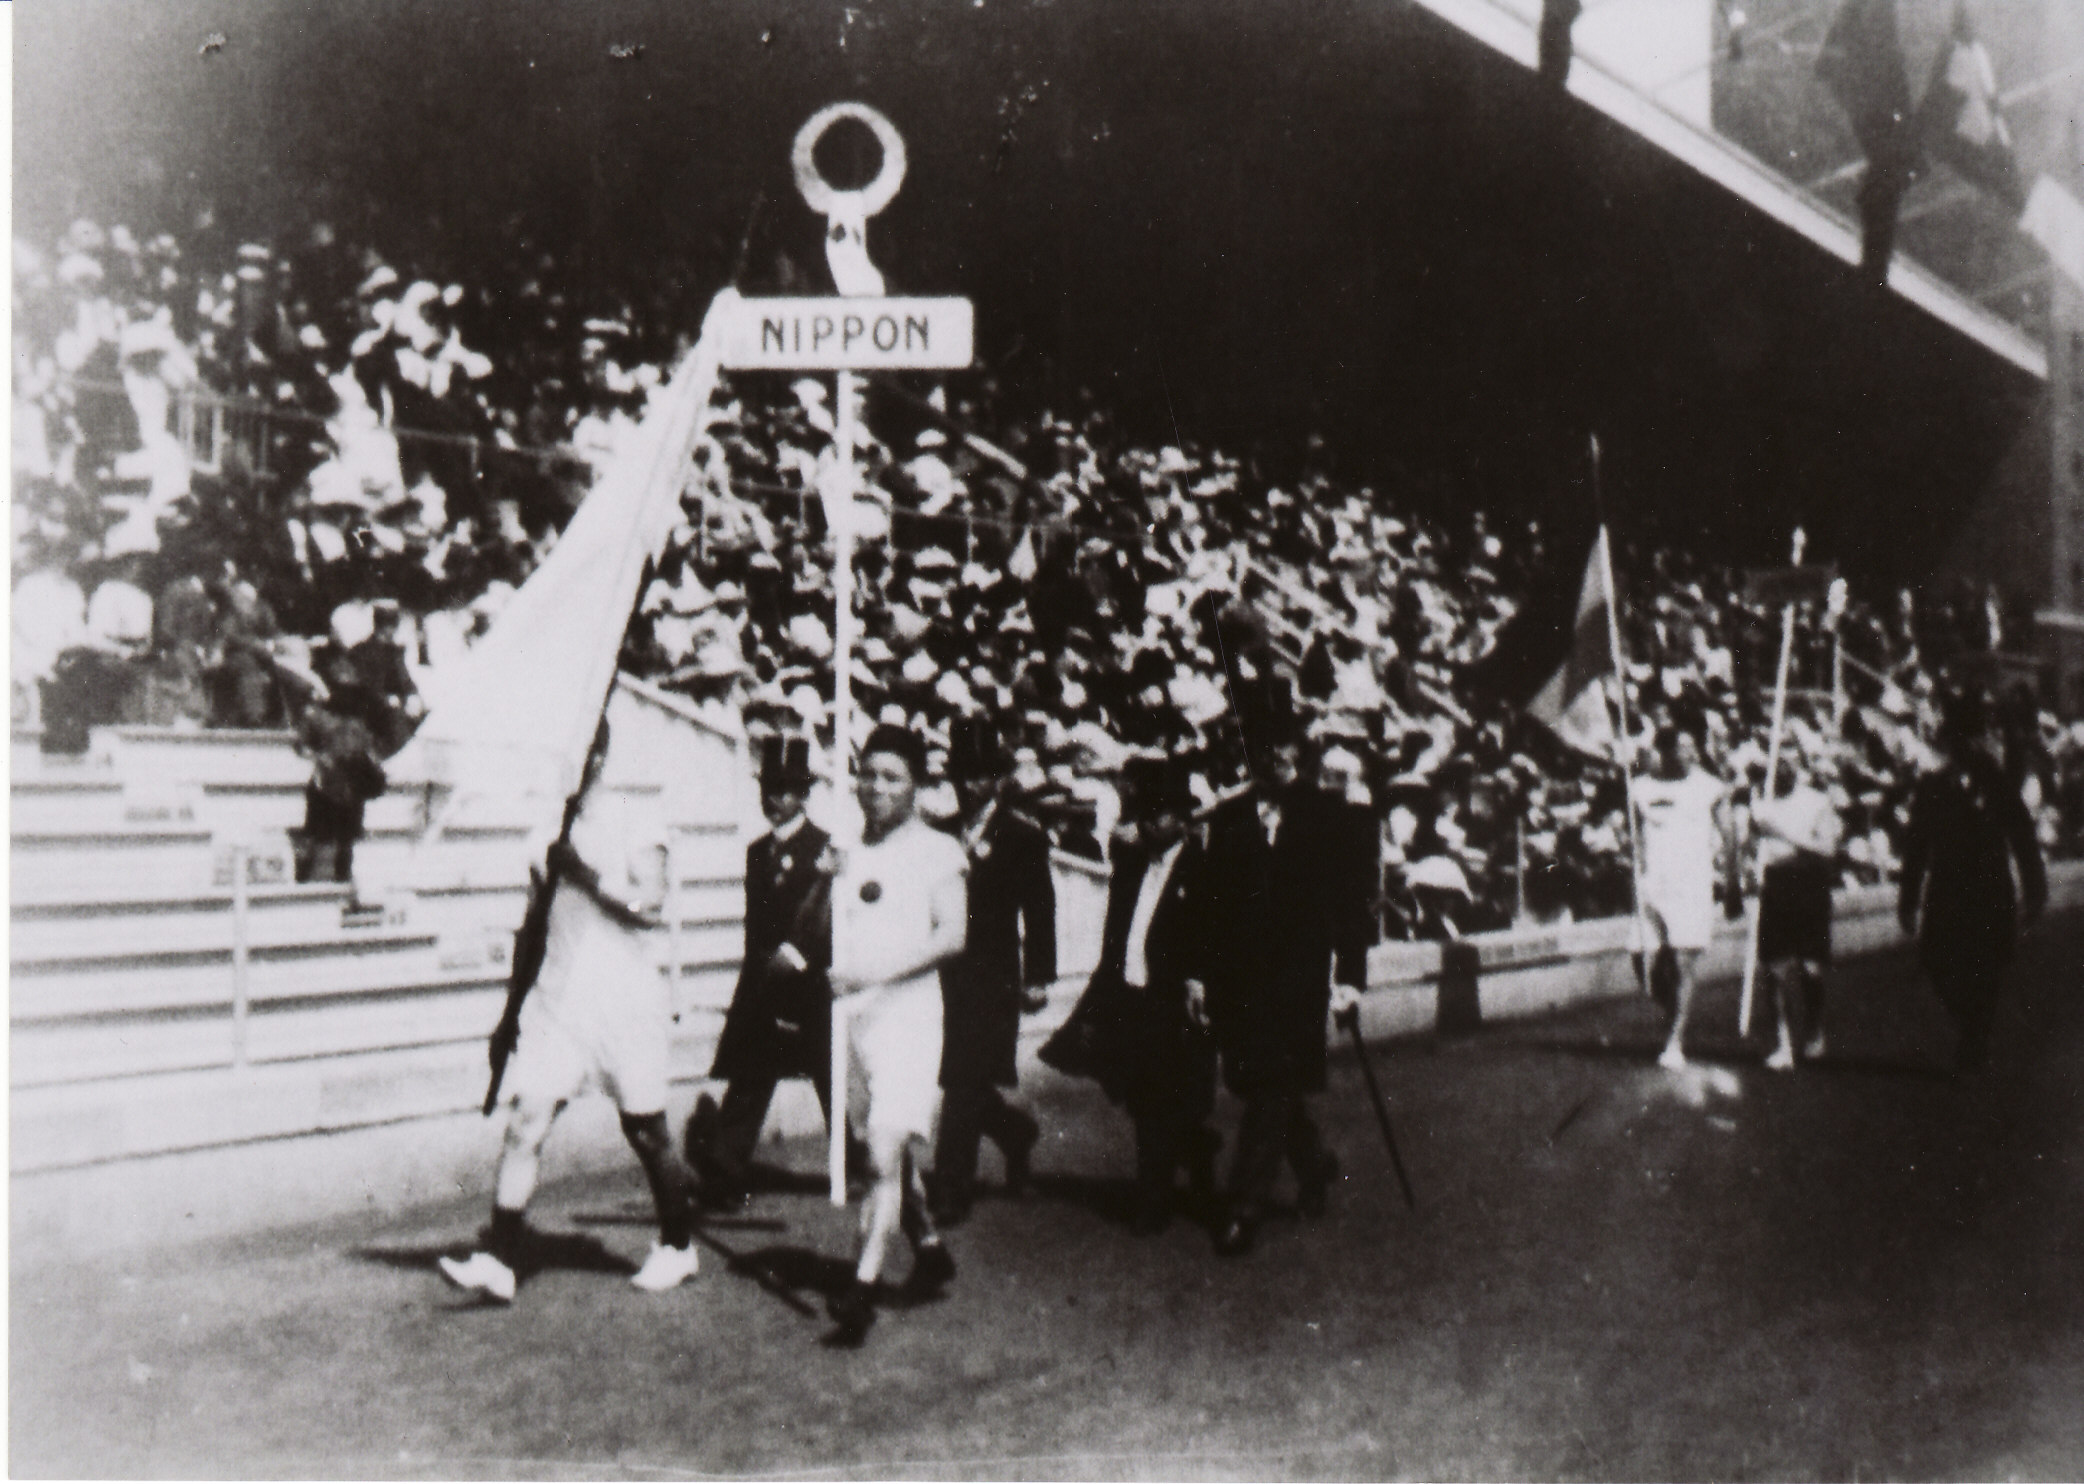 Glory days: Japan's first Olympians, Shiso Kanakuri (right) and Yahiko Mishima (holding flag), at the opening ceremony for the Stockholm Games in 1912. | CLIVE FRANCE PHOTOS